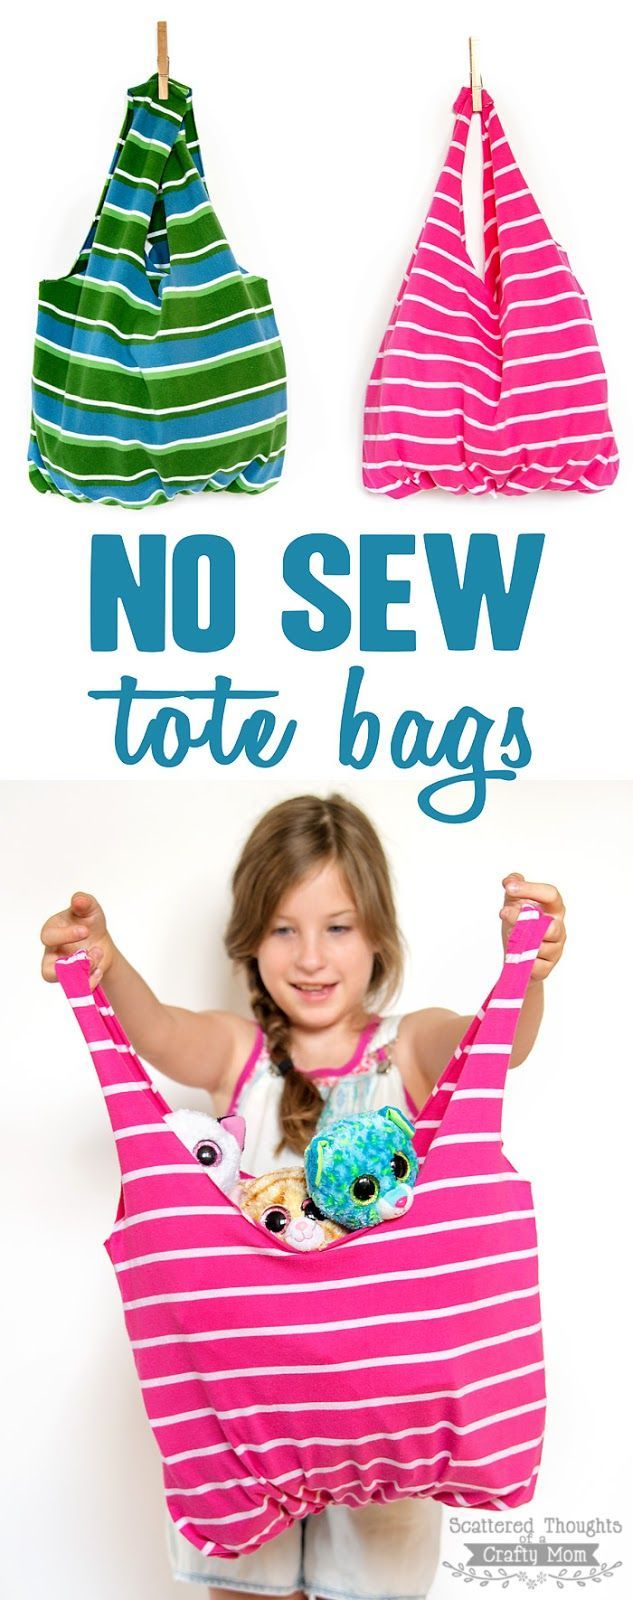 Learn how to make these No Sew Tote Bags.  All you need is an old T-shirt and a pair of scissors!  (Upcycling / recycling at its